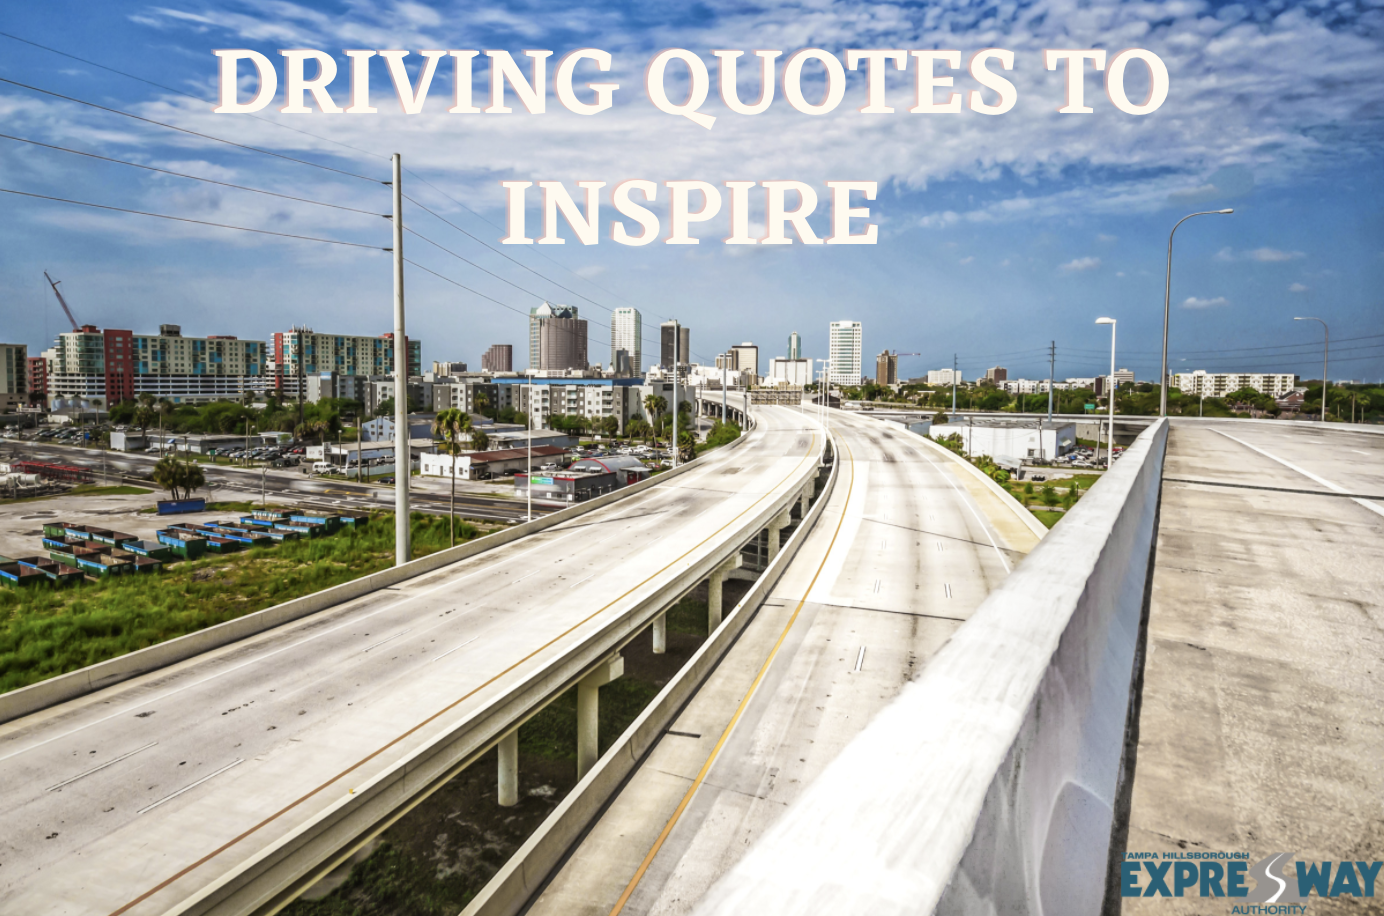 https://www.tampa-xway.com/wp-content/uploads/2020/11/Driving-Quotes-to-Inspire.png